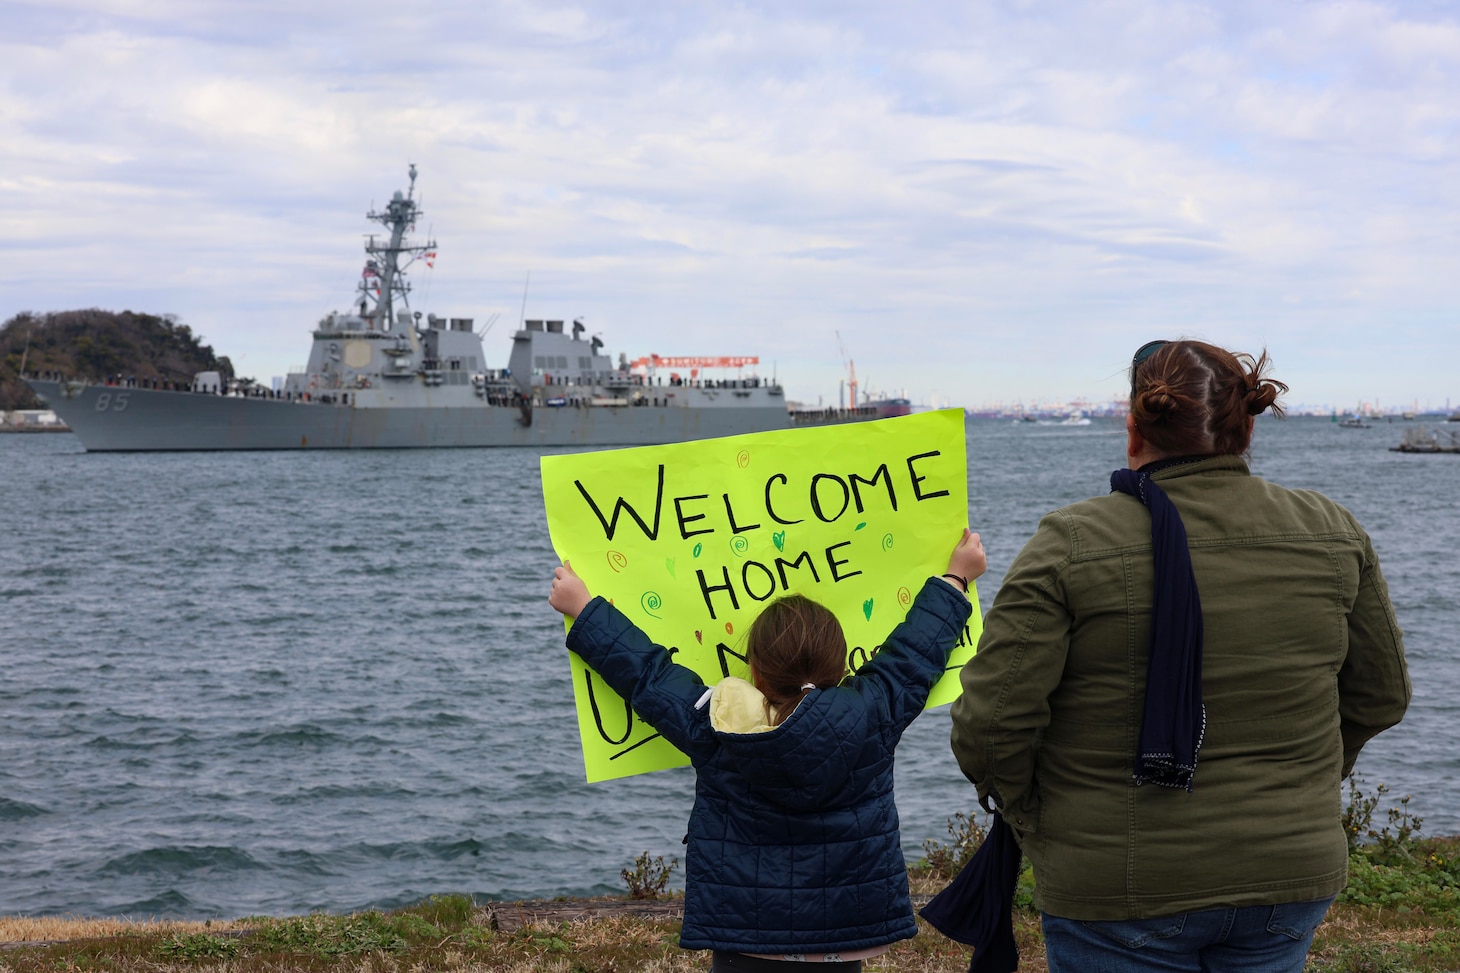 YOKOSUKA, Japan (March 2, 2024) – Family members await the arrival of the Arleigh Burke-class guided-missile destroyer USS McCampbell (DDG 85) as the ship returns to Commander, Fleet Activities Yokosuka, March 2, after a 17-month Depot Modernization Period in Portland, Oregon. McCampbell is forward-deployed and assigned to Destroyer Squadron (DESRON) 15, the Navy’s largest DESRON and the U.S. 7th Fleet’s principal surface force. (U.S. Navy photo by Mass Communication Specialist 1st Class Greg Johnson)